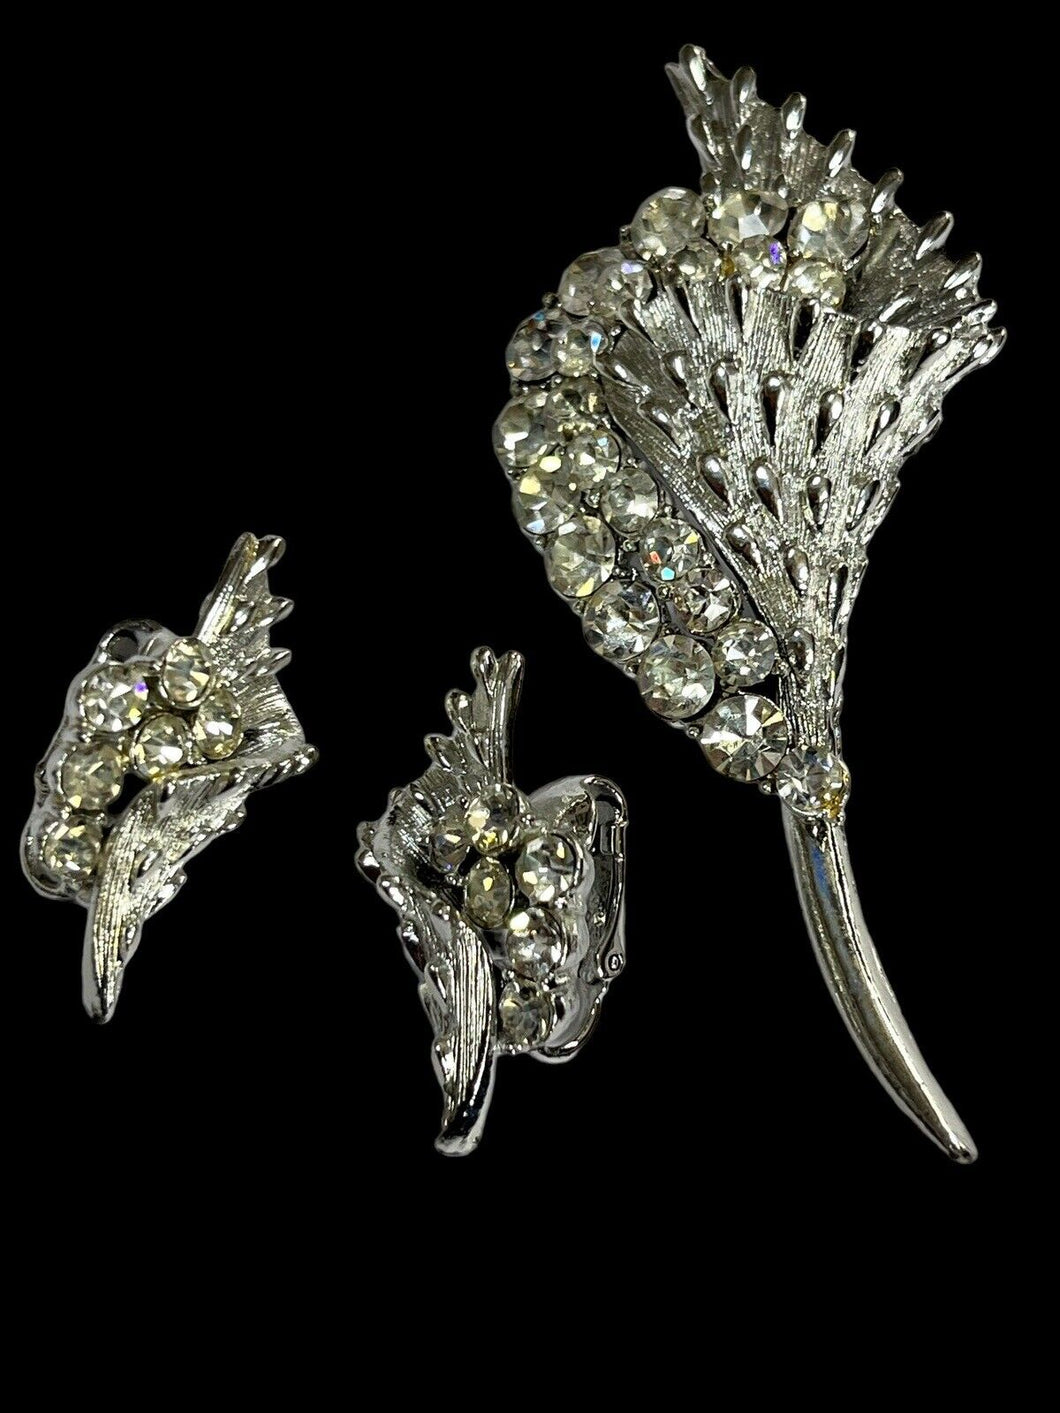 Vintage Signed Coro Silver Tone Diamanté Brooch And Clip On Earring Set